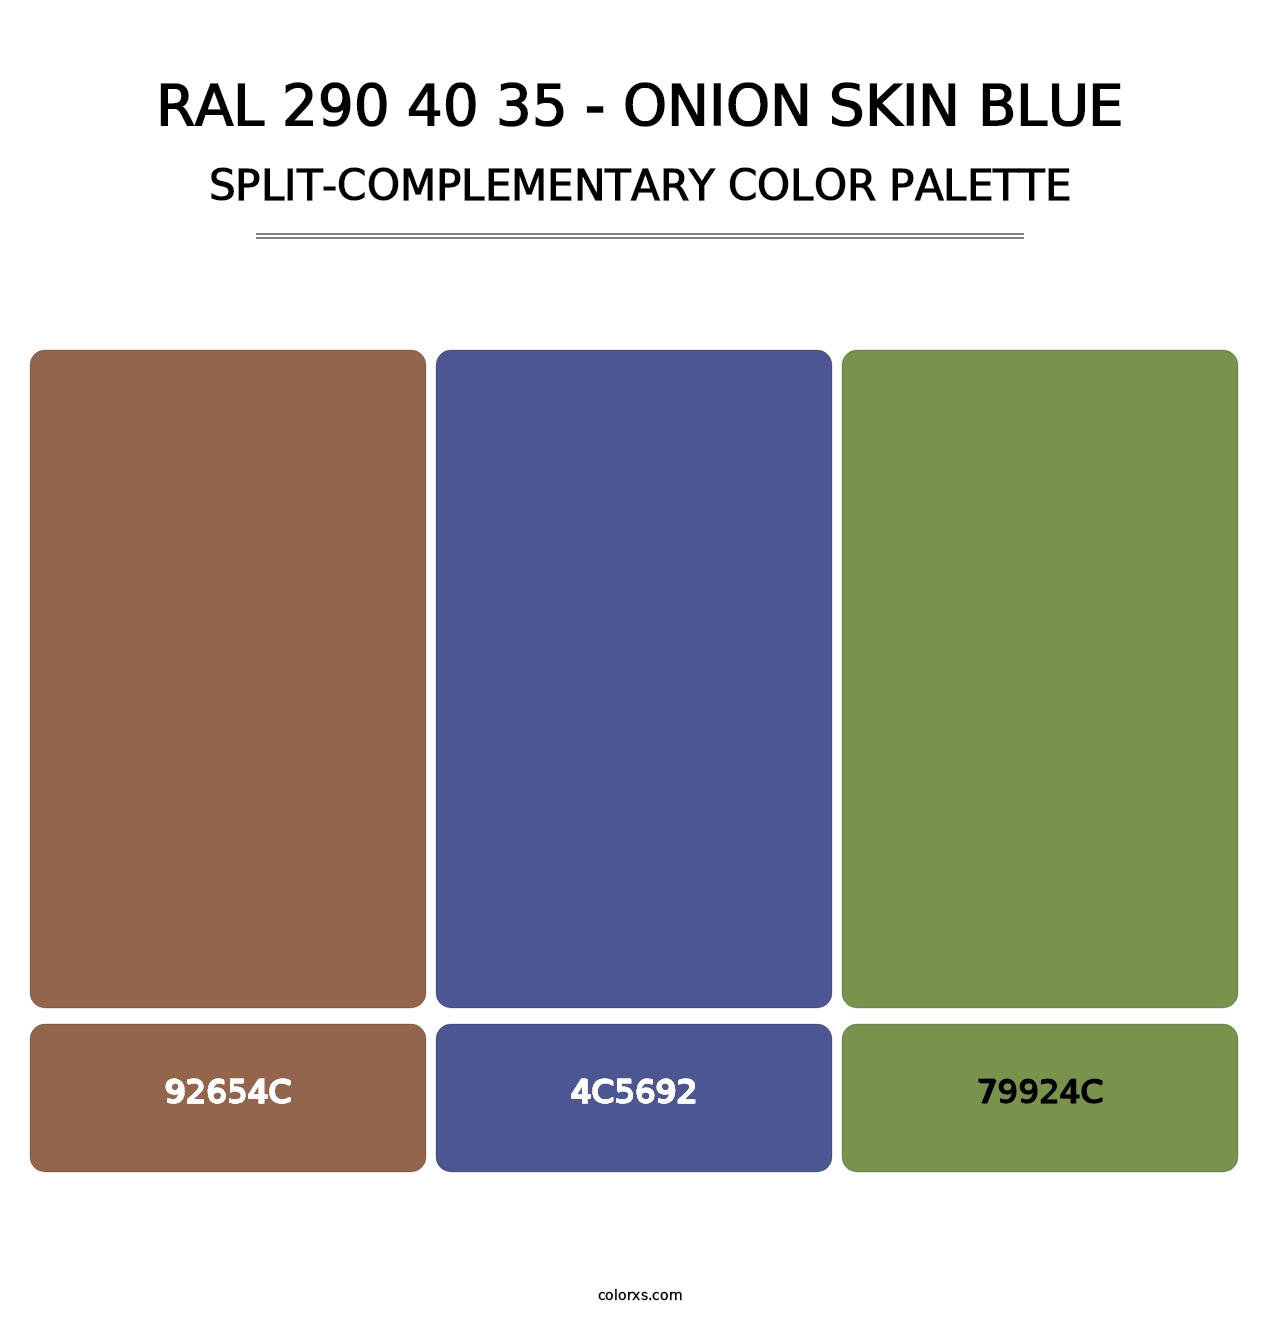 RAL 290 40 35 - Onion Skin Blue - Split-Complementary Color Palette